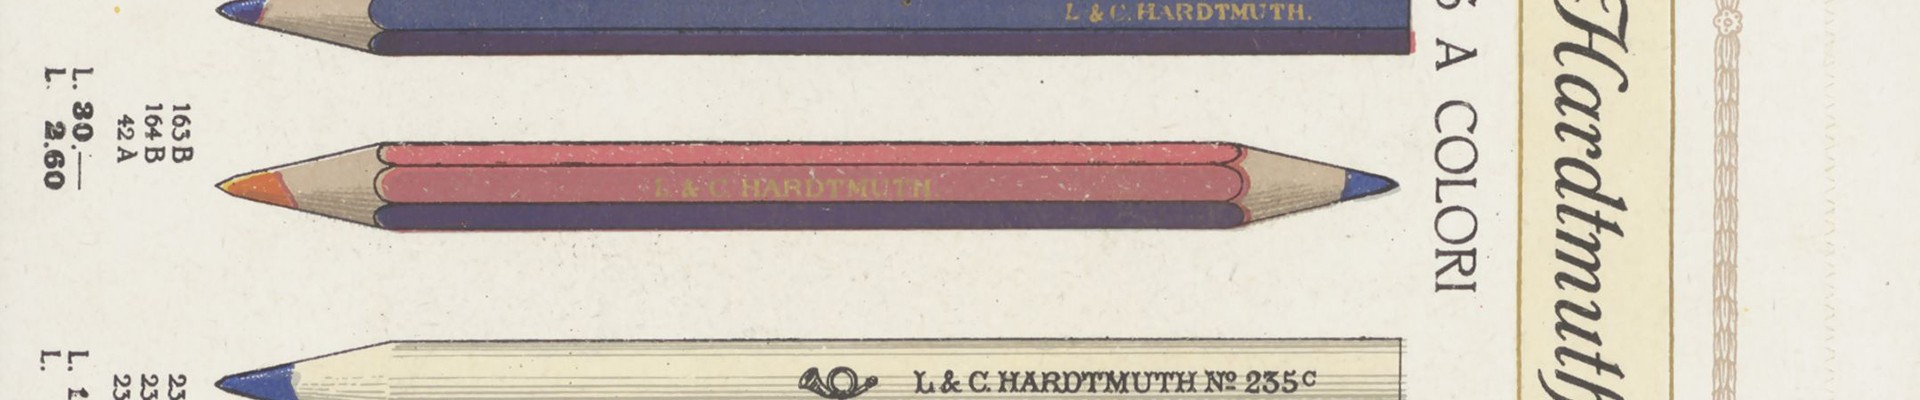 Advertising brochure of the company L. C. Hardtmuth around 1930, showing three coloured pencils: 